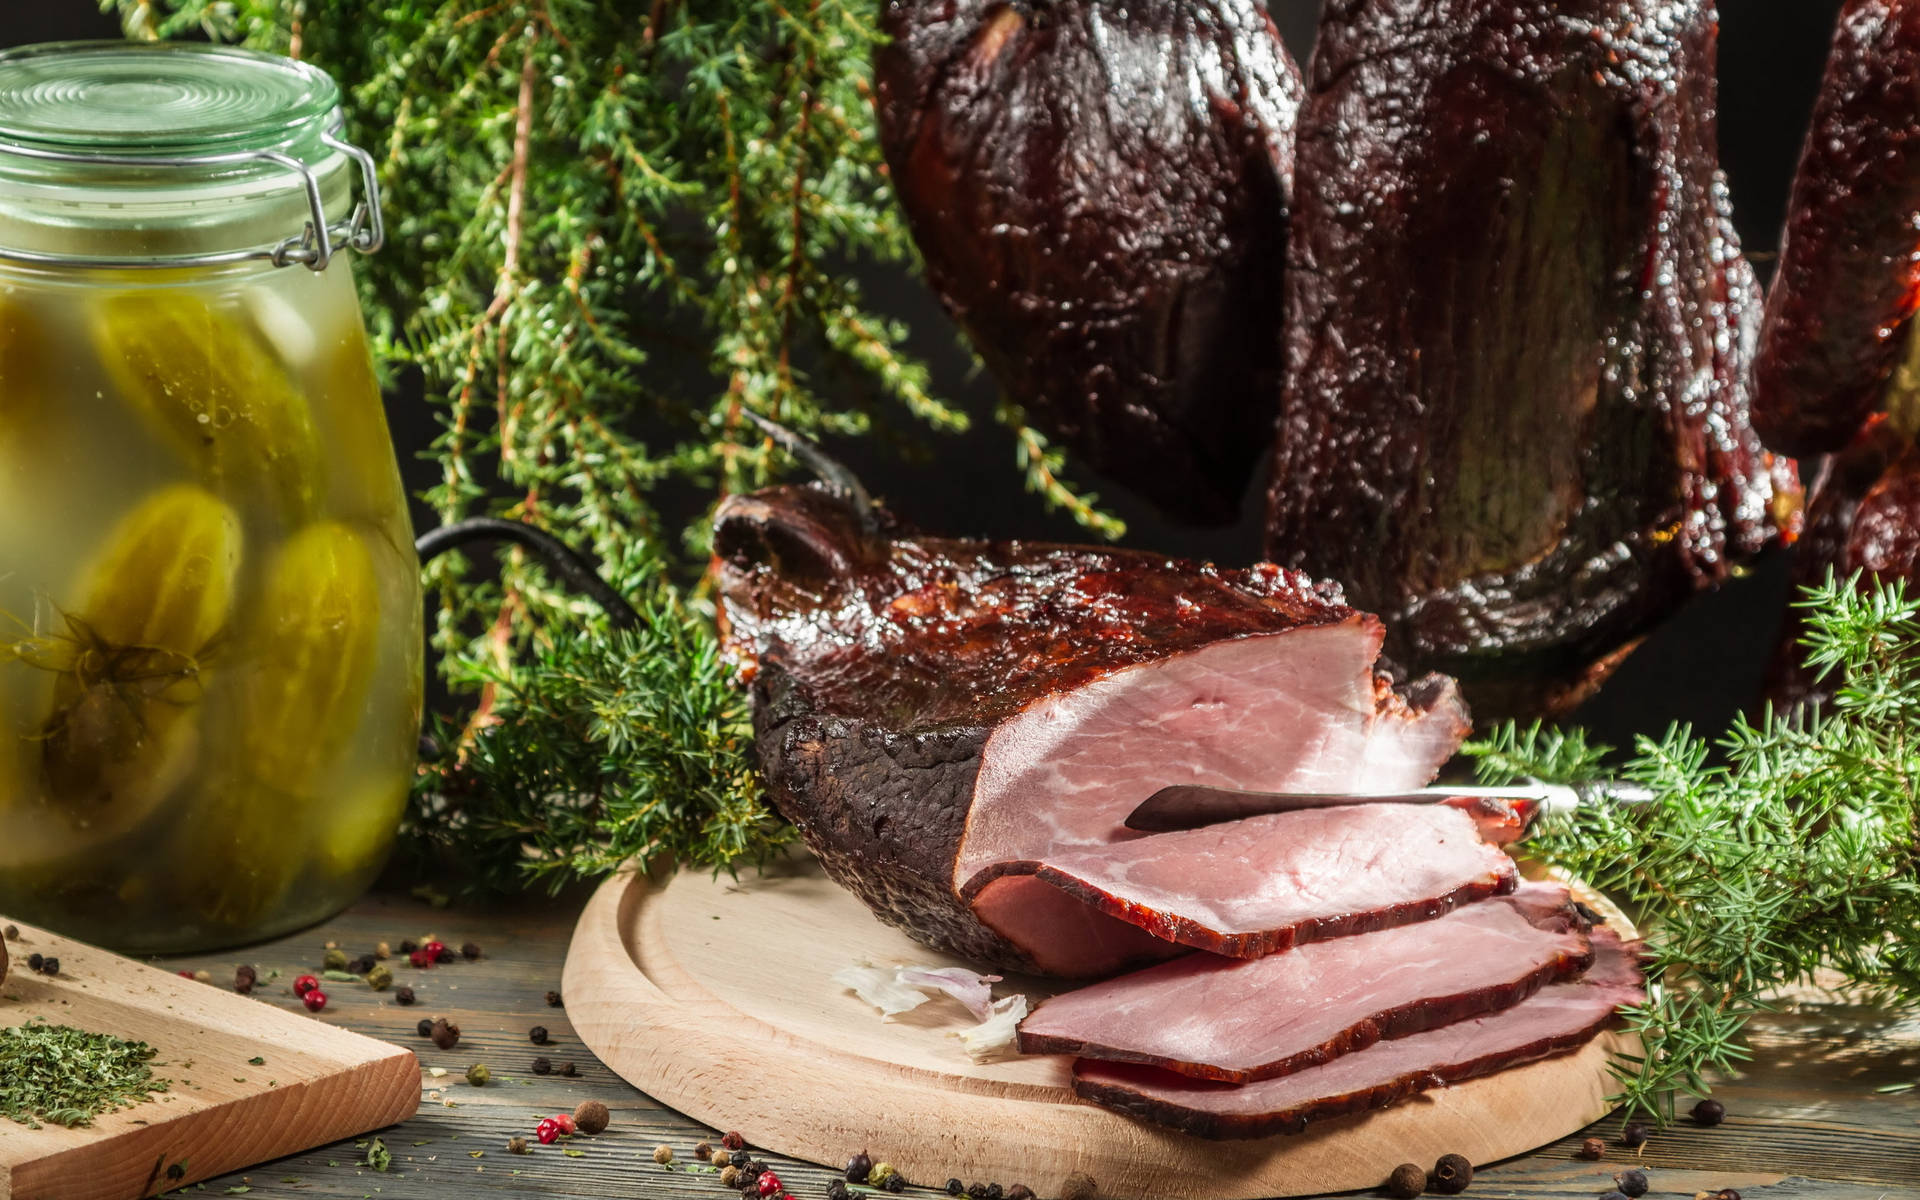 Tempting Smoked Ham - A Gastronomic Delight